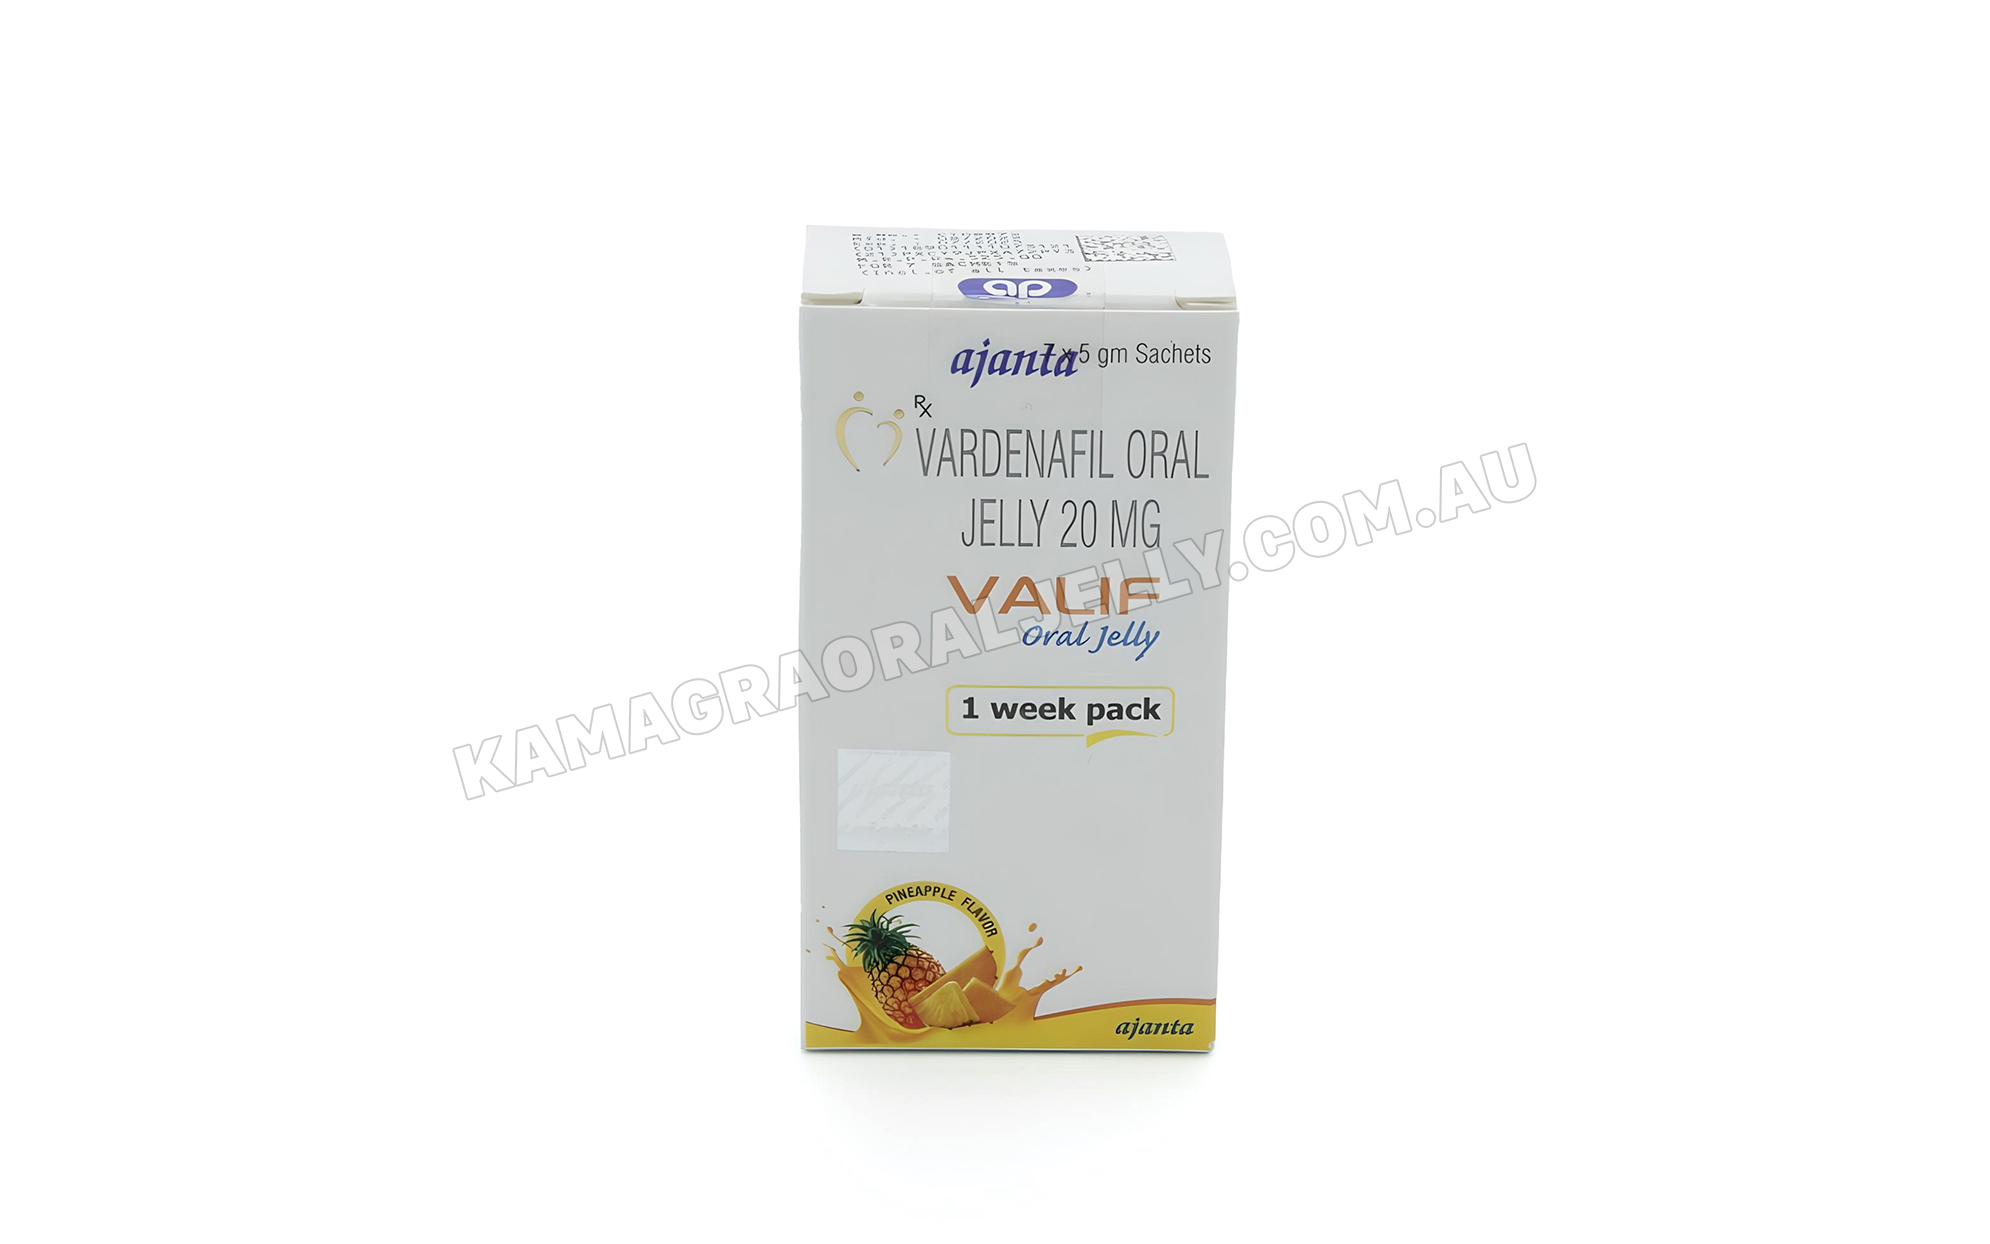 Why choose Valif Oral Jelly?